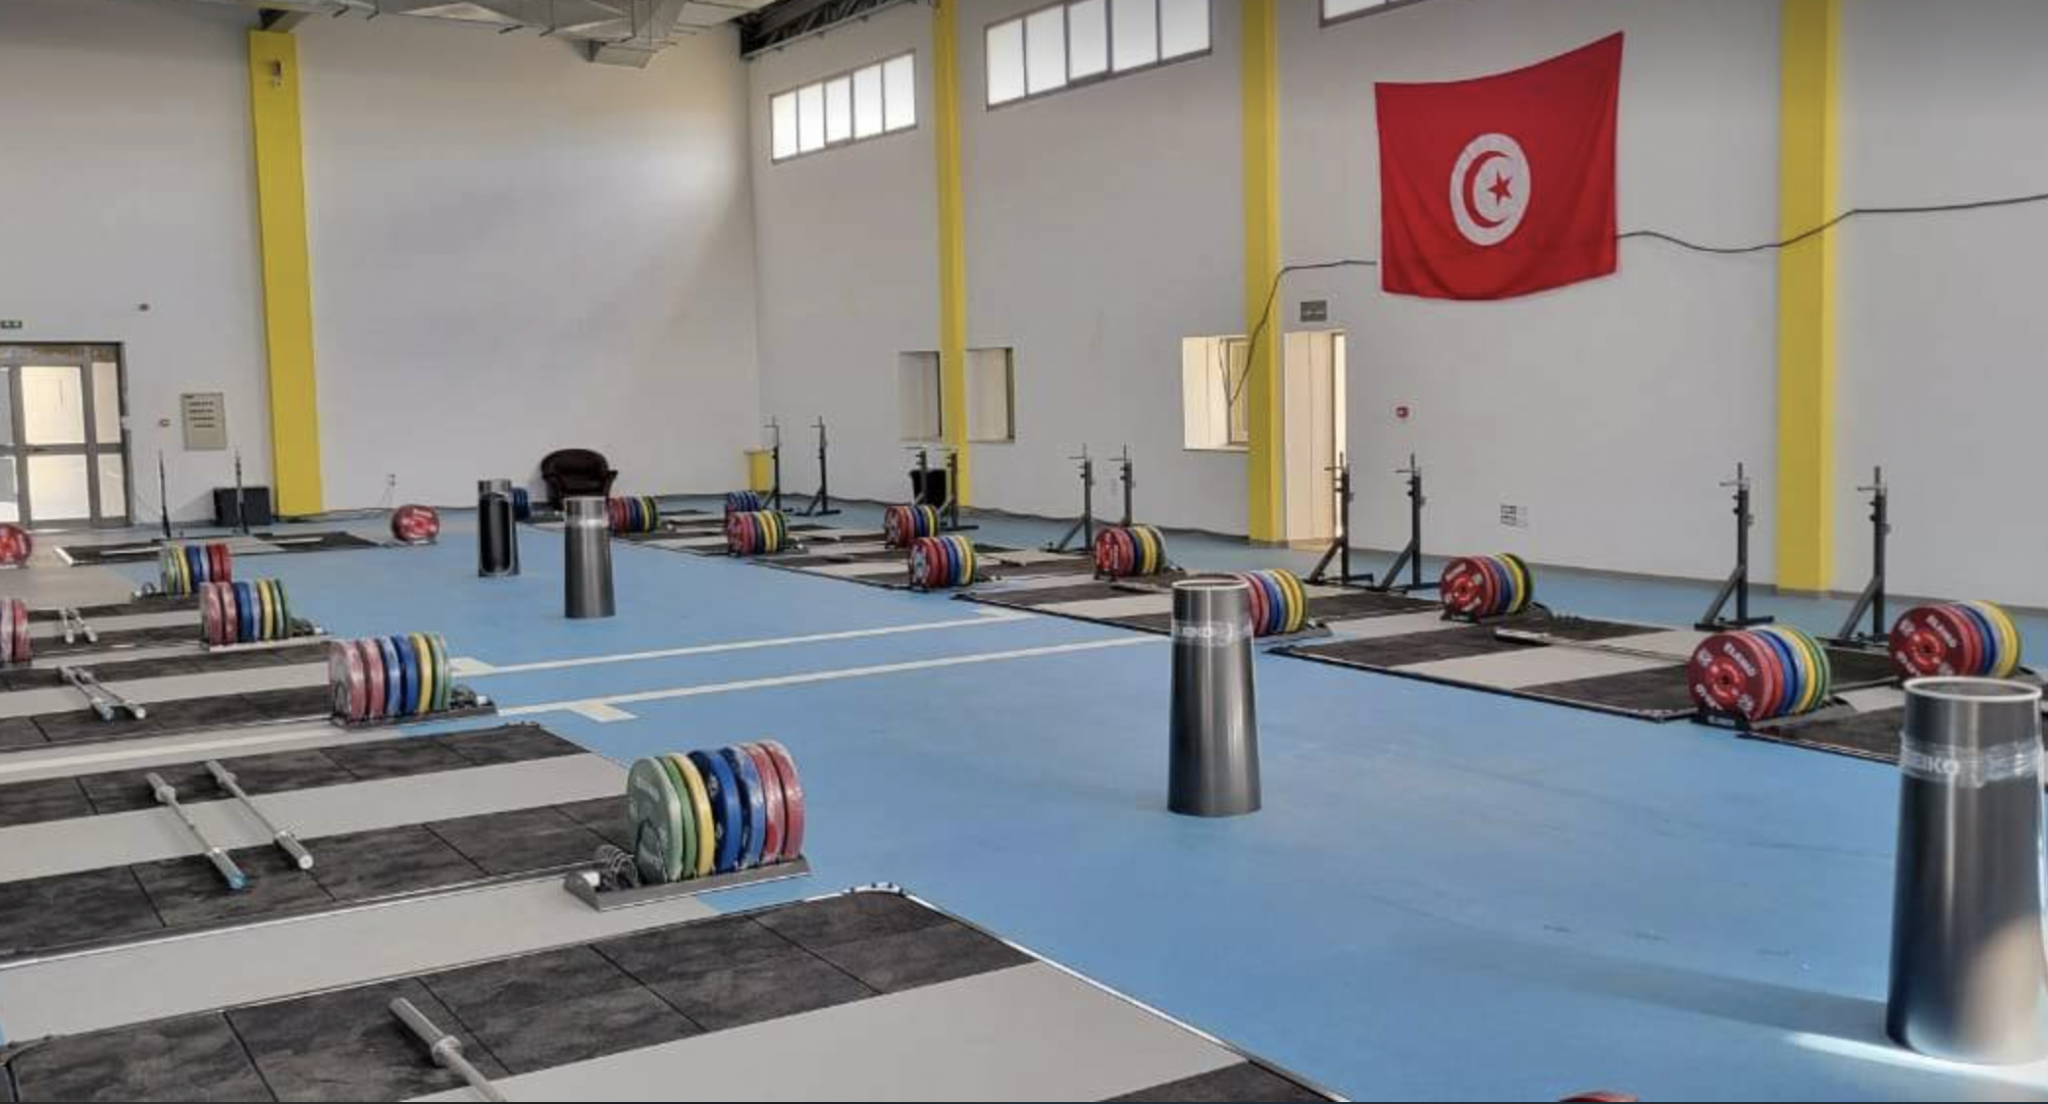 Tunisia's national weightlifting centre could be utilised to help the sport develop in Africa ©ITG